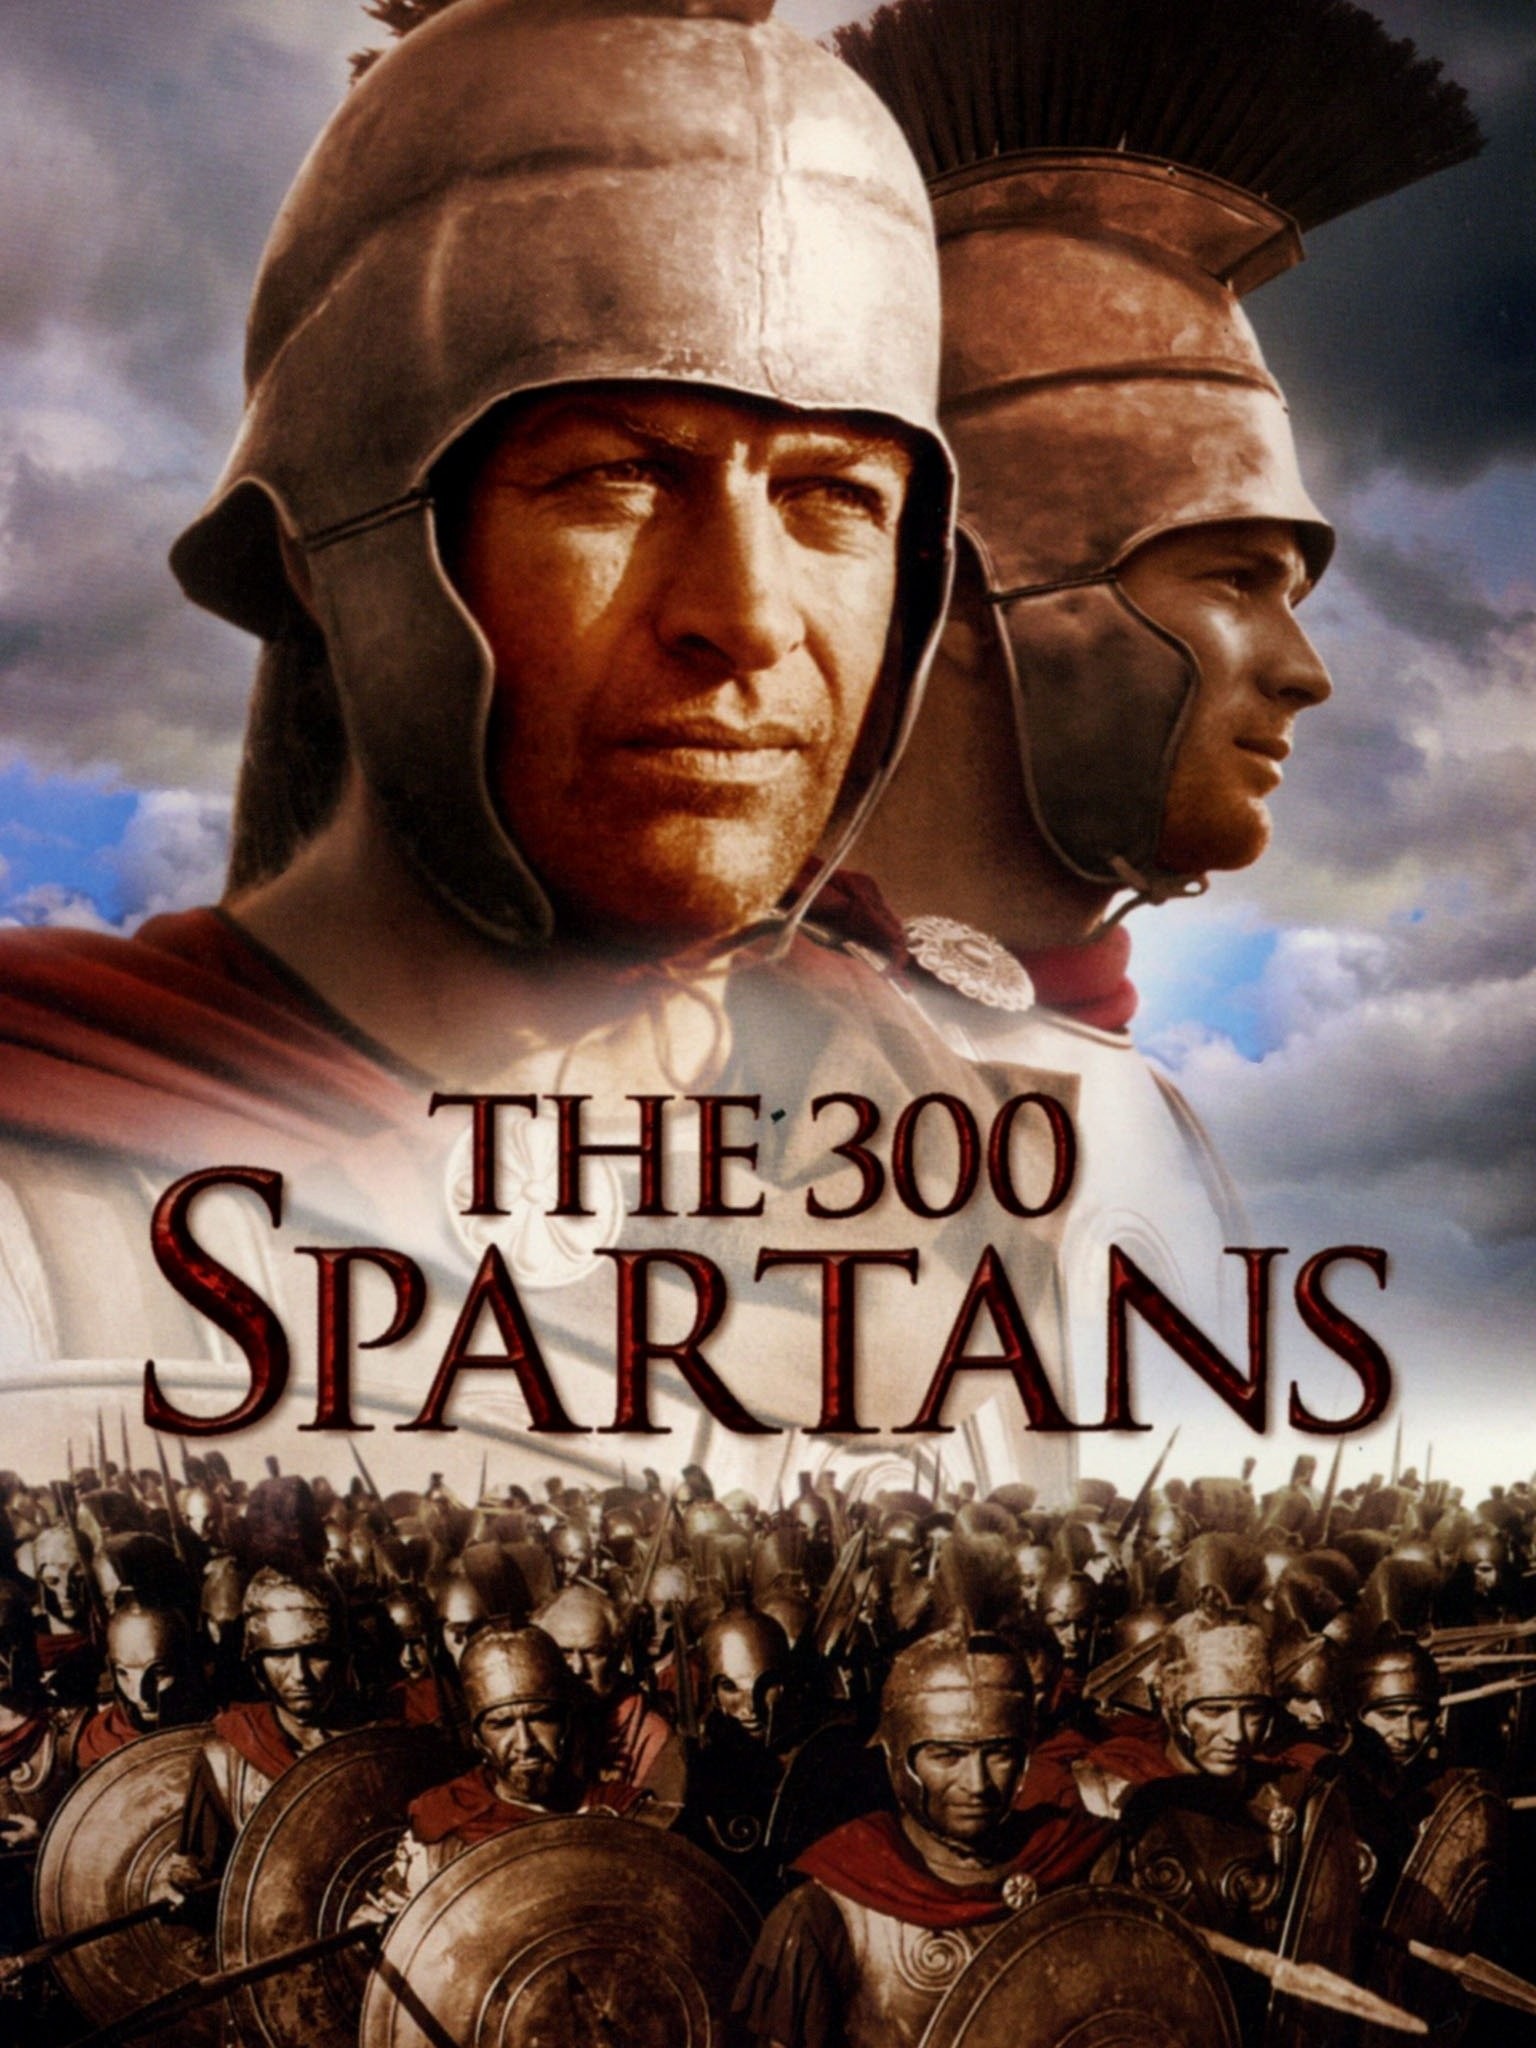 Meet the Spartans - Rotten Tomatoes